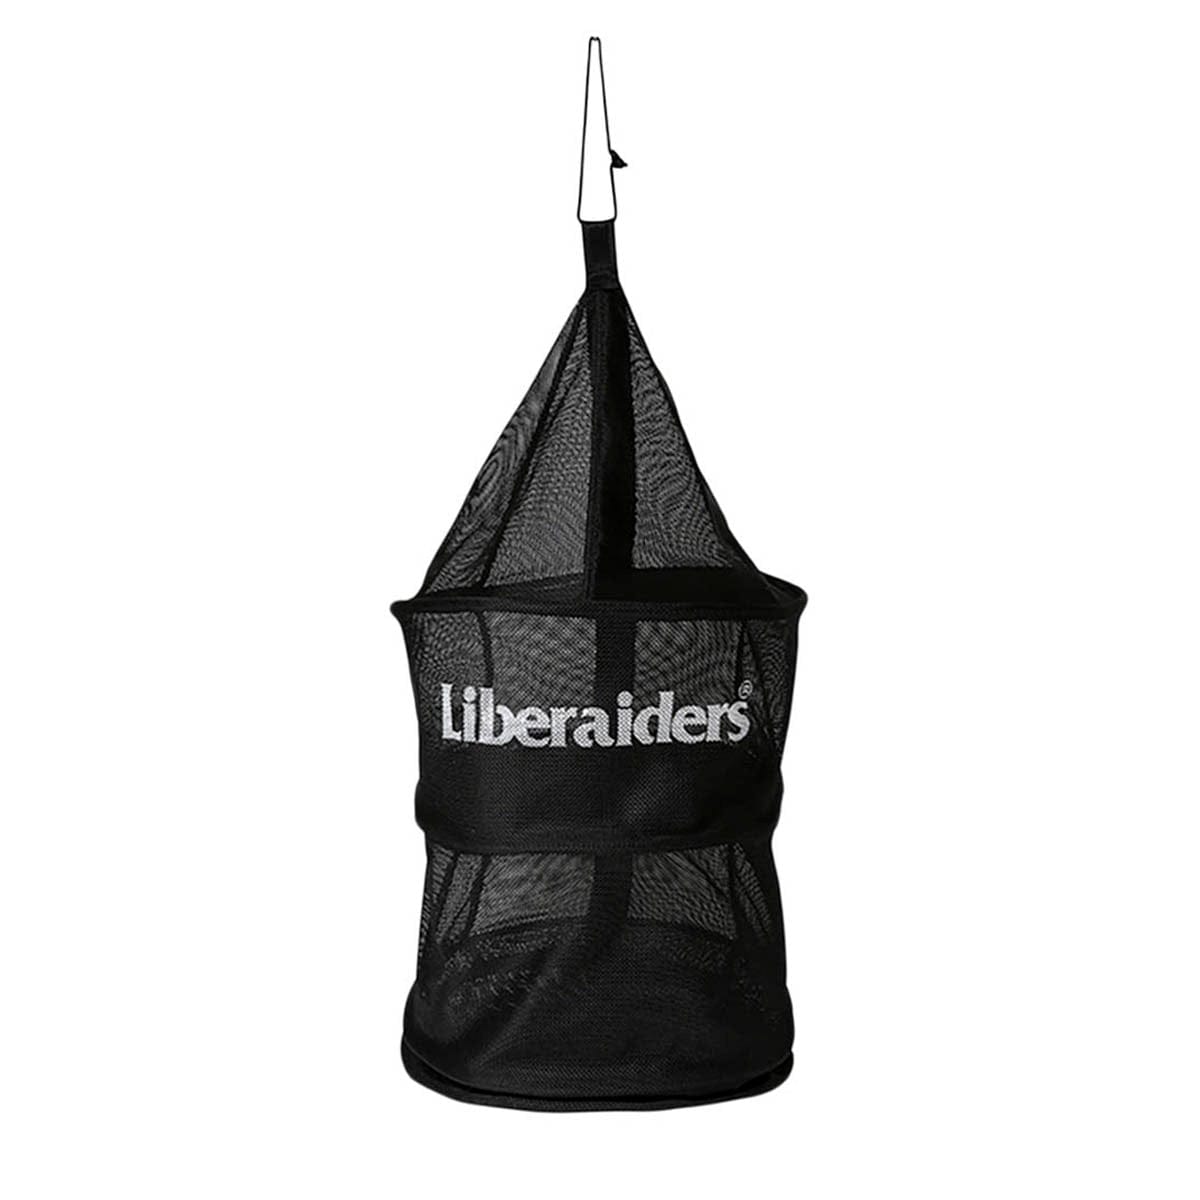 Liberaiders Odds & Ends BLACK / O/S PX HANGING DRY NET